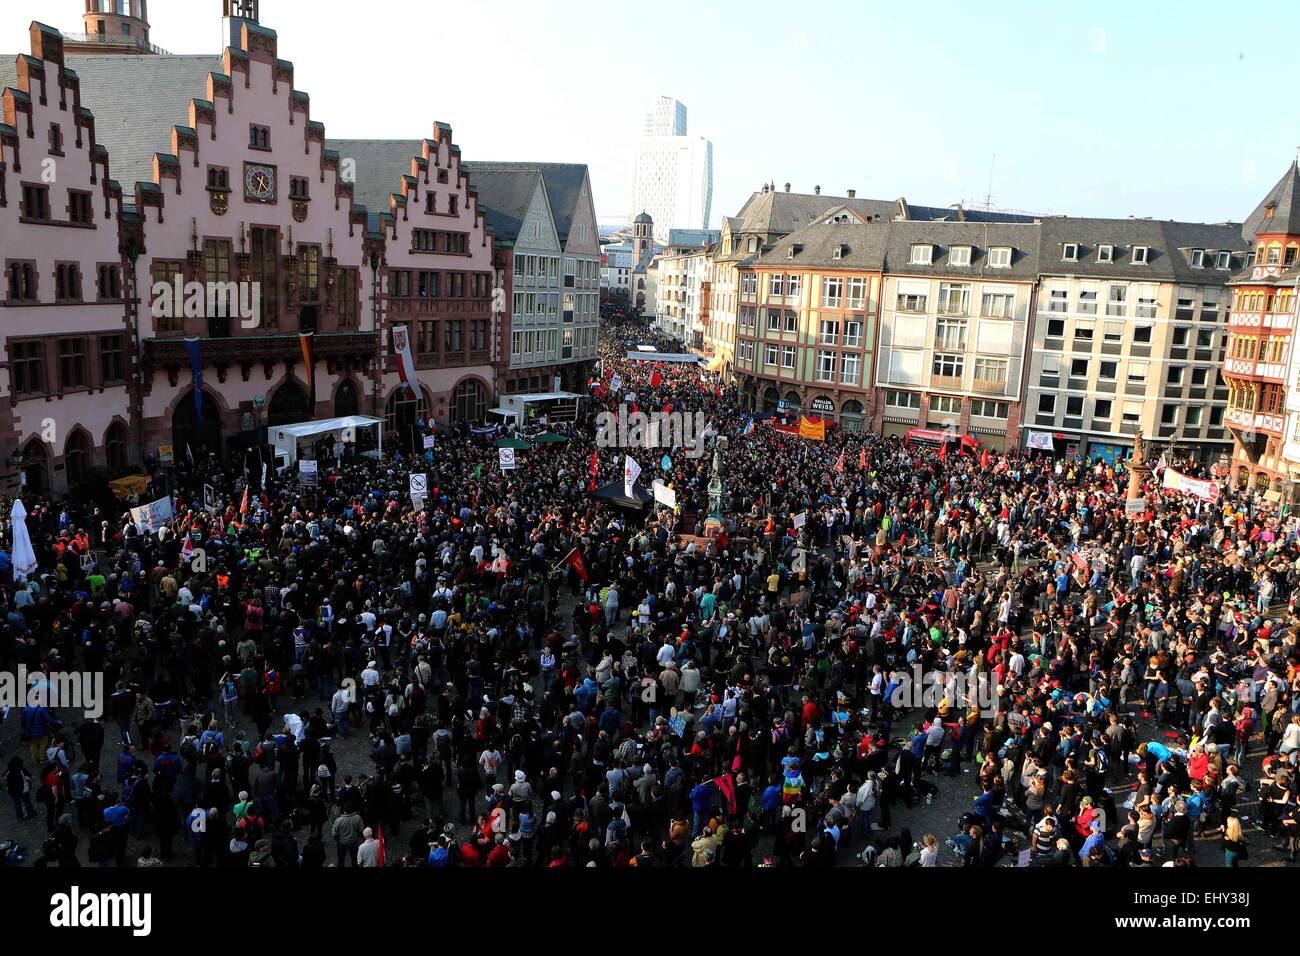 Frankfurt, Germany. 18th Mar, 2015. Supporters of Blockupy Alliance demonstrate after the European Central Bank (ECB) officially inaugurated its new headquarters in Frankfurt, Germany, on March 18, 2015. At least 88 policemen were injured and more than 500 people were arrested after anti-austerity protests in Frankfurt turned into clashes between protesters and police on Wednesday, local media reported. Credit:  Luo Huanhuan/Xinhua/Alamy Live News Stock Photo